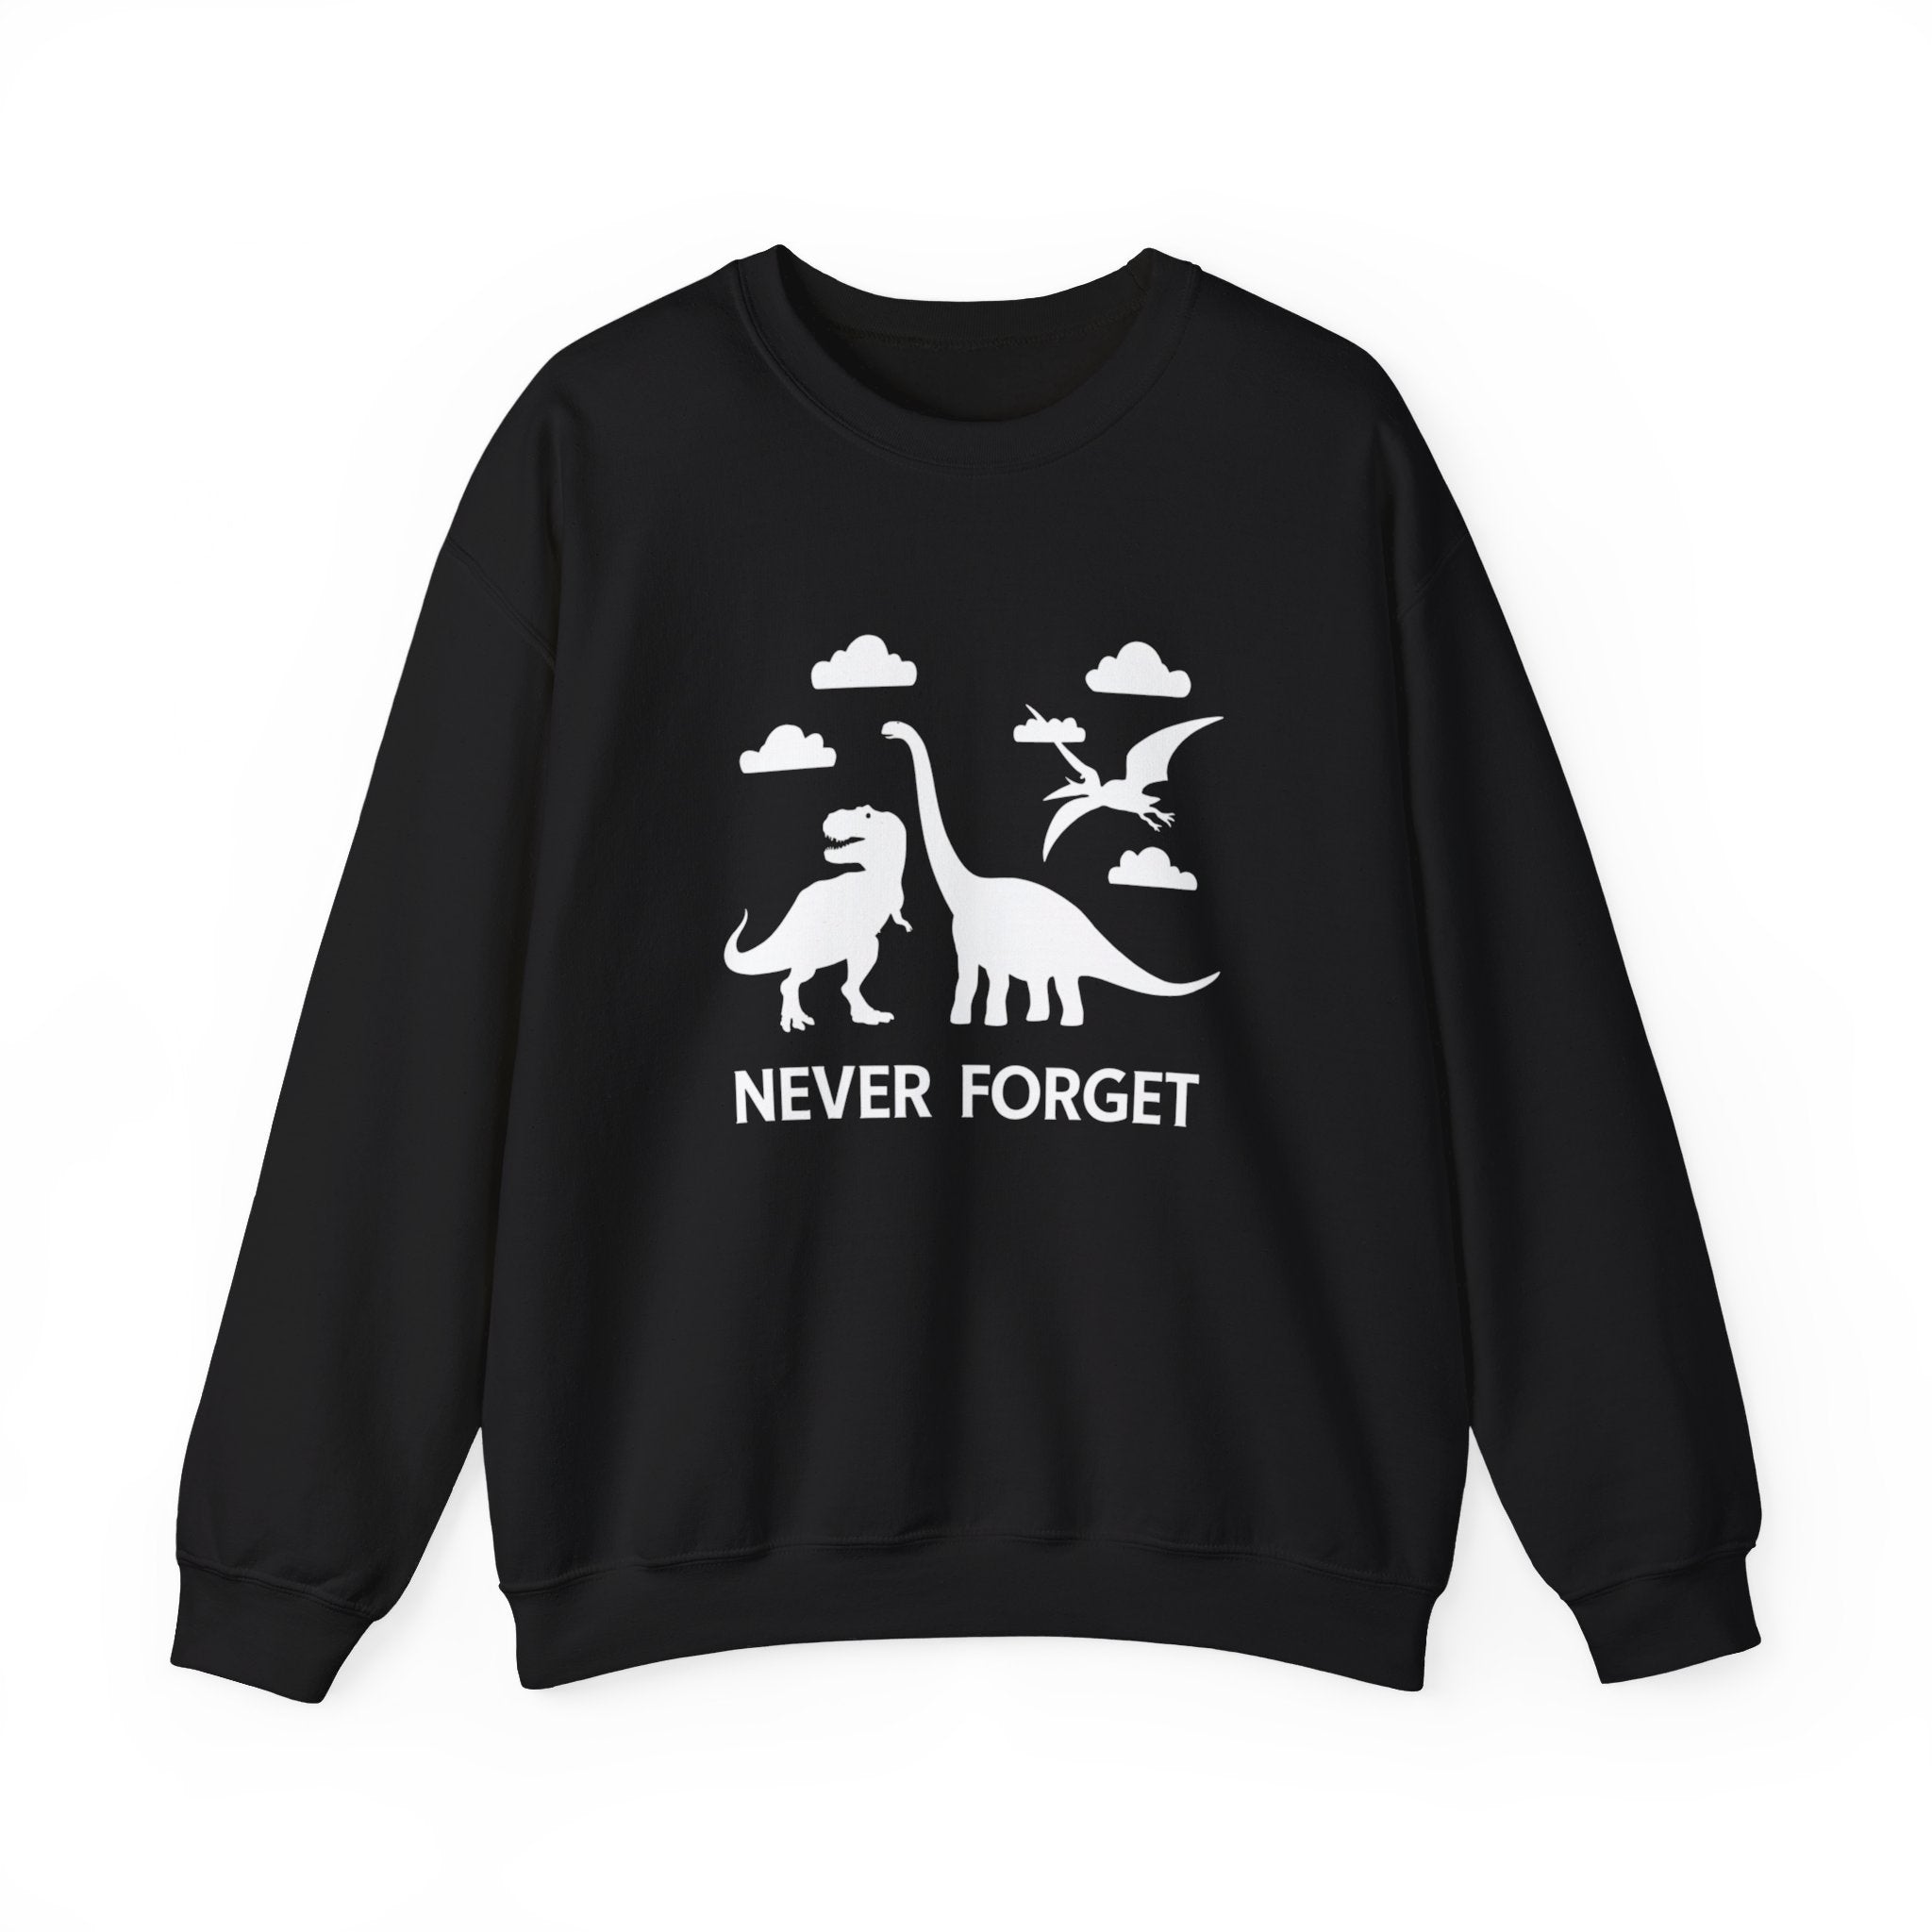 The Never Forget - Sweatshirt is a black, cozy addition to your winter wardrobe, featuring white silhouettes of dinosaurs and clouds with the phrase "NEVER FORGET" below the images.